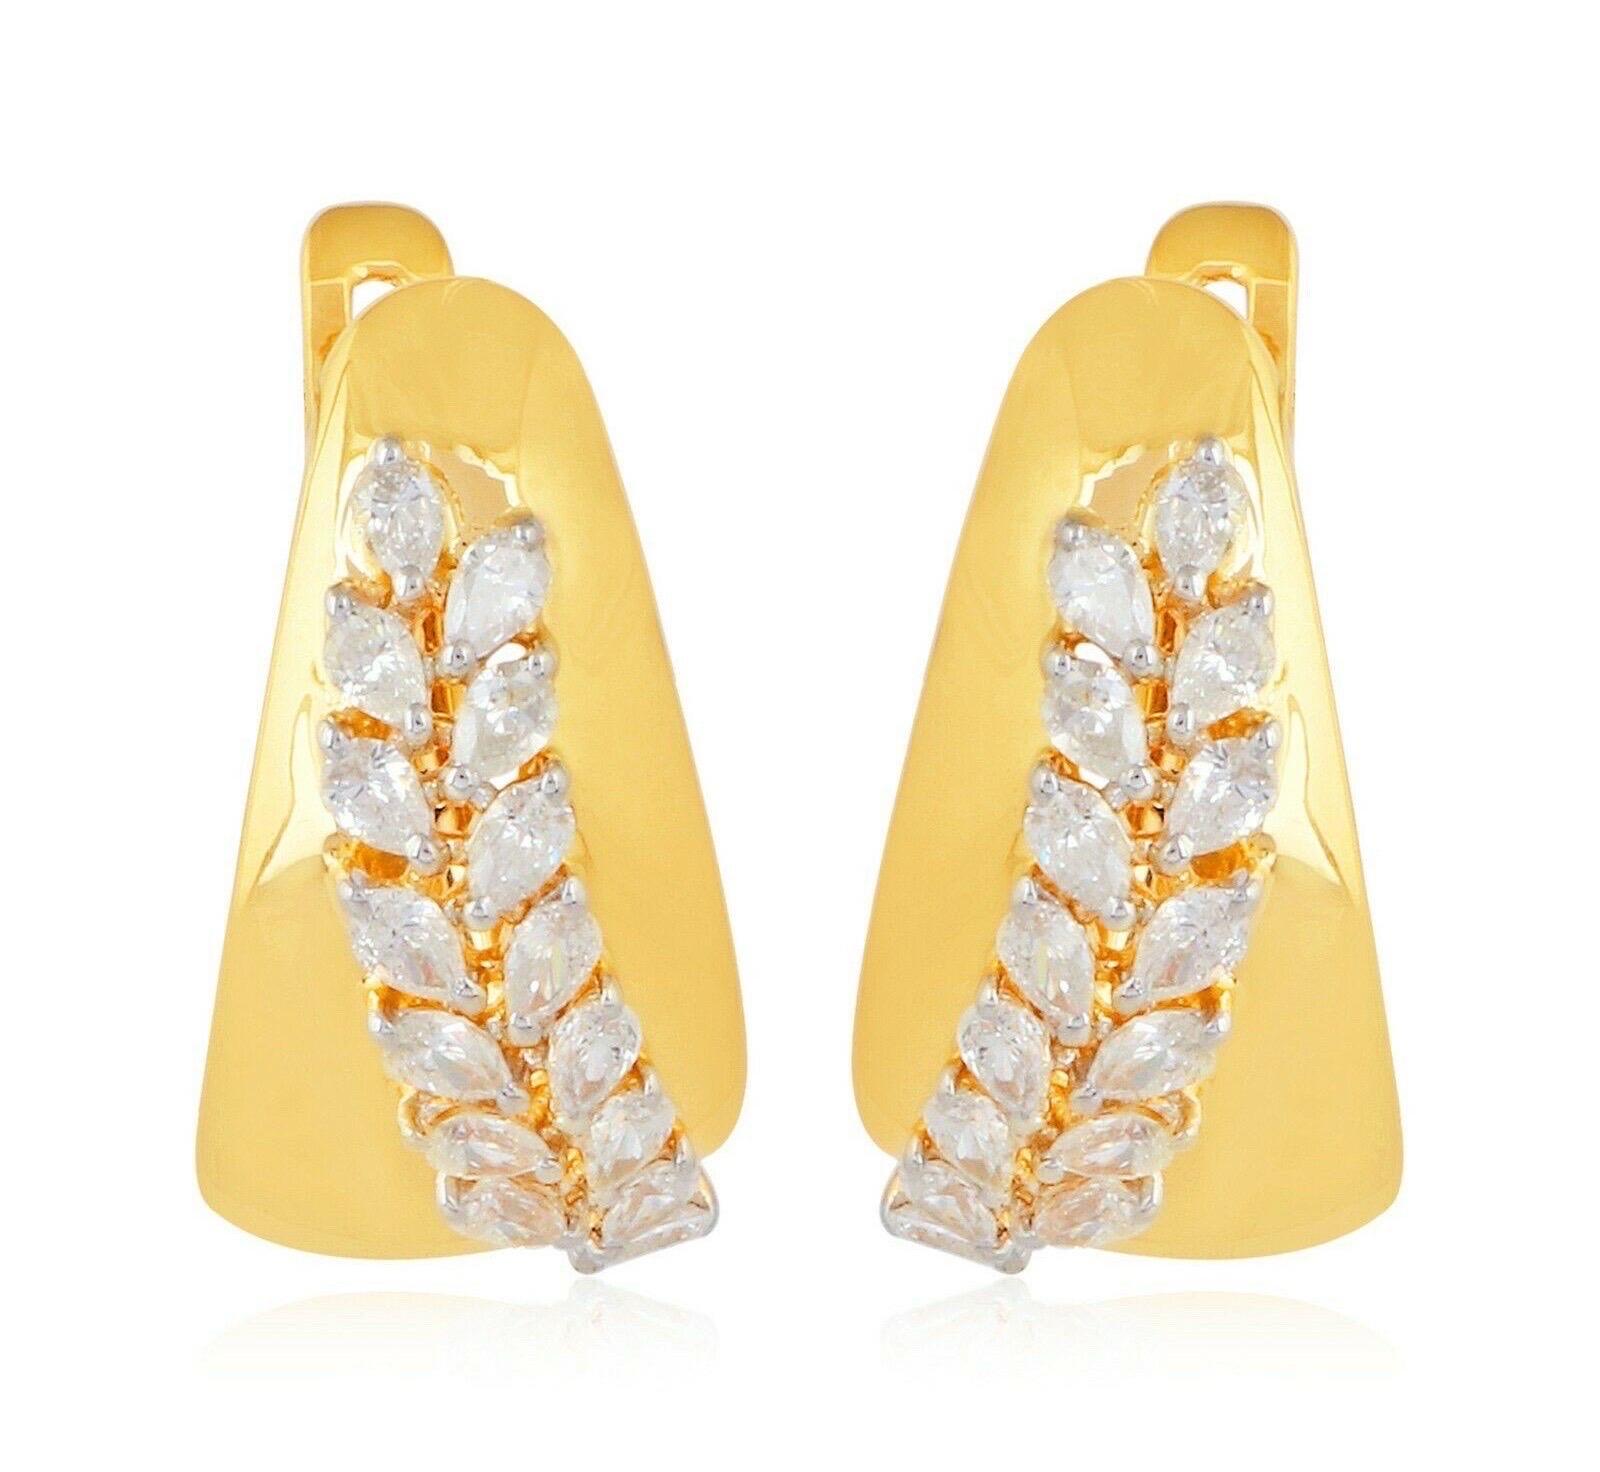 Cast from 18-karat matte gold, these beautiful huggie hoop earrings are hand set with 1.25 carats of sparkling diamonds. Available in white, rose and yellow gold.

FOLLOW MEGHNA JEWELS storefront to view the latest collection & exclusive pieces.